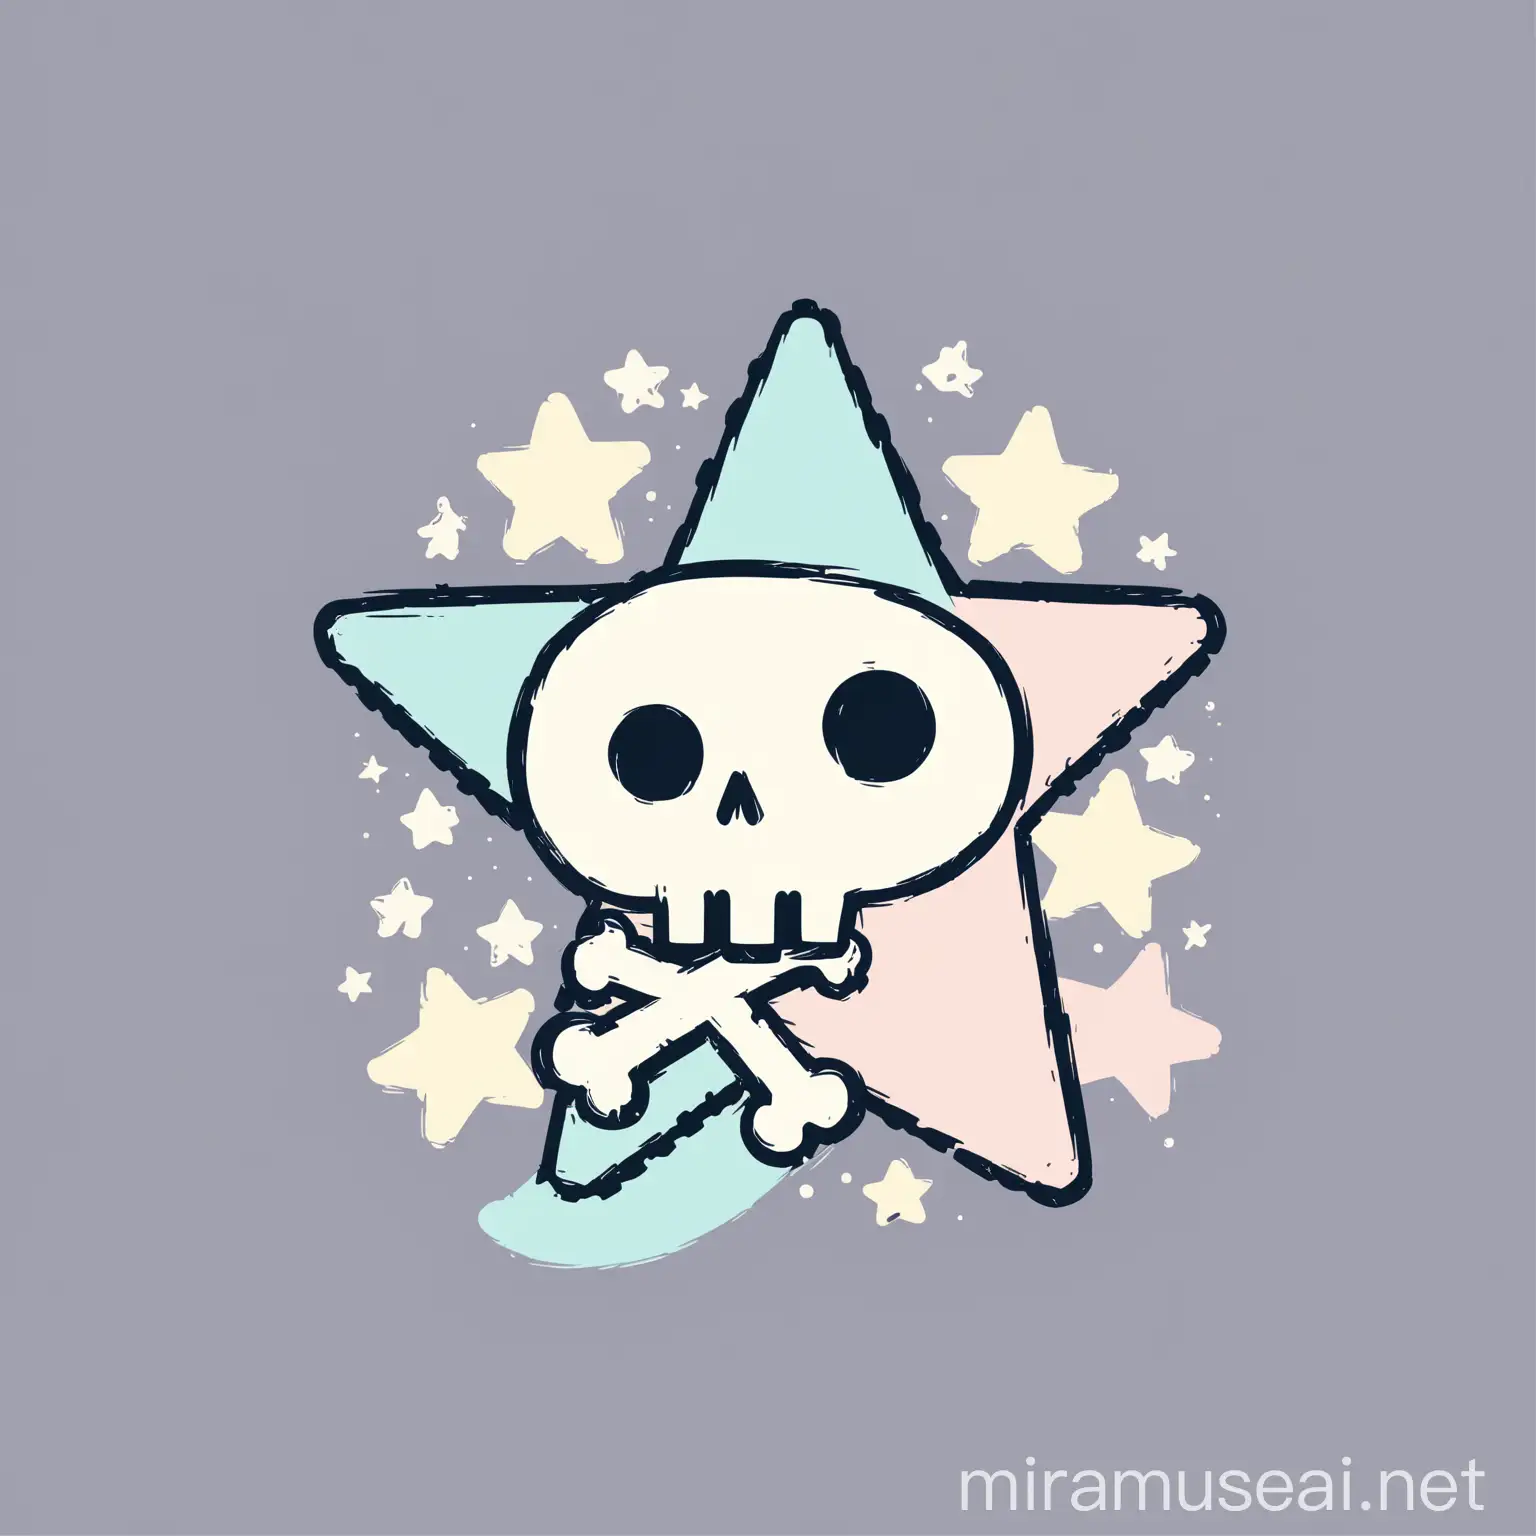 Illustration, vector, flatcolor, no background, Minimalist, simple, cutie mark, pastel colors, colorful, pretty, simple, A bone and a star, a star made of bones, pastel colored bones, Single figure, logo, logo style, without text 